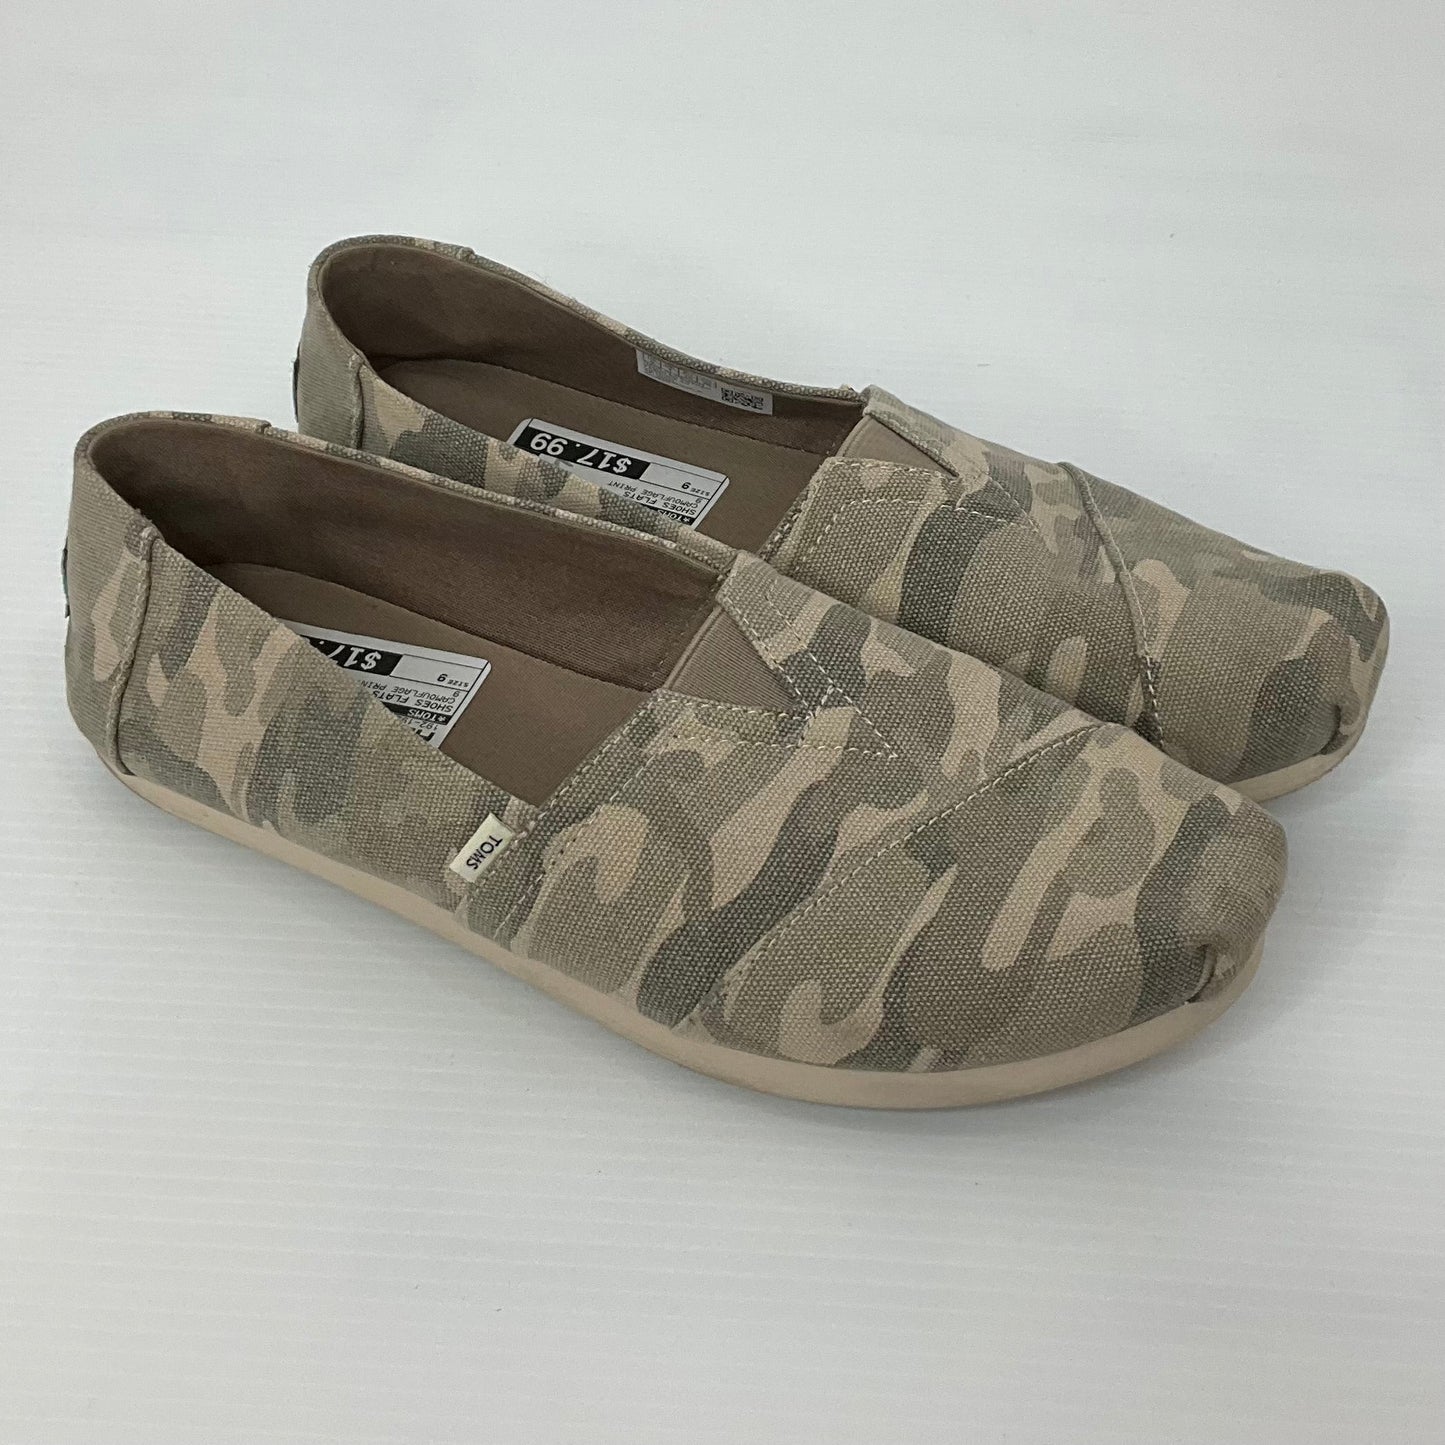 Camouflage Print Shoes Flats Toms, Size 9